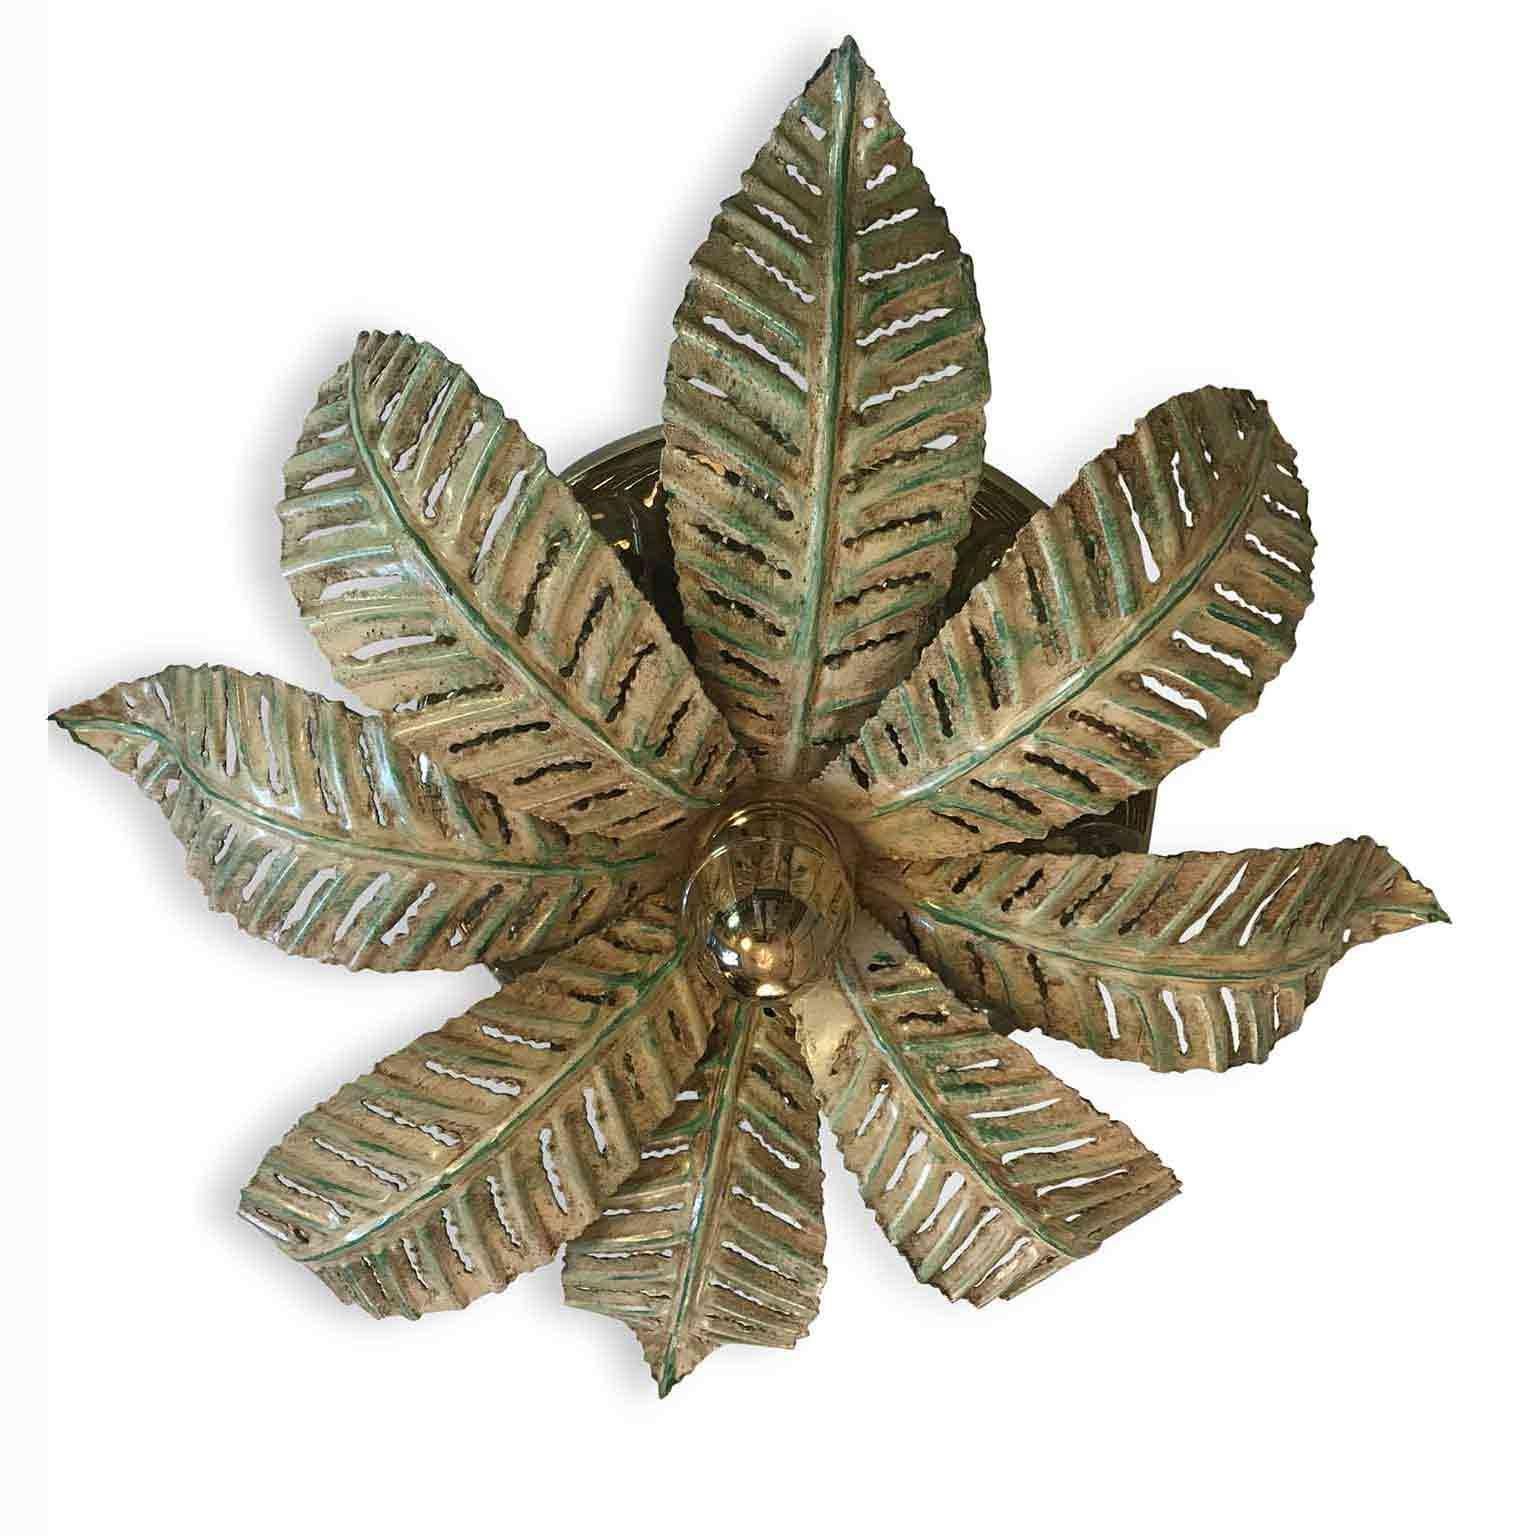 Italian eight-light ceiling fixture by Banci, manufactured by Banci Firenze. Eight-lights hidden by a round foliate iron structure painted with green pale accents, This original Italian design ceiling light is decorated with green painted pierced